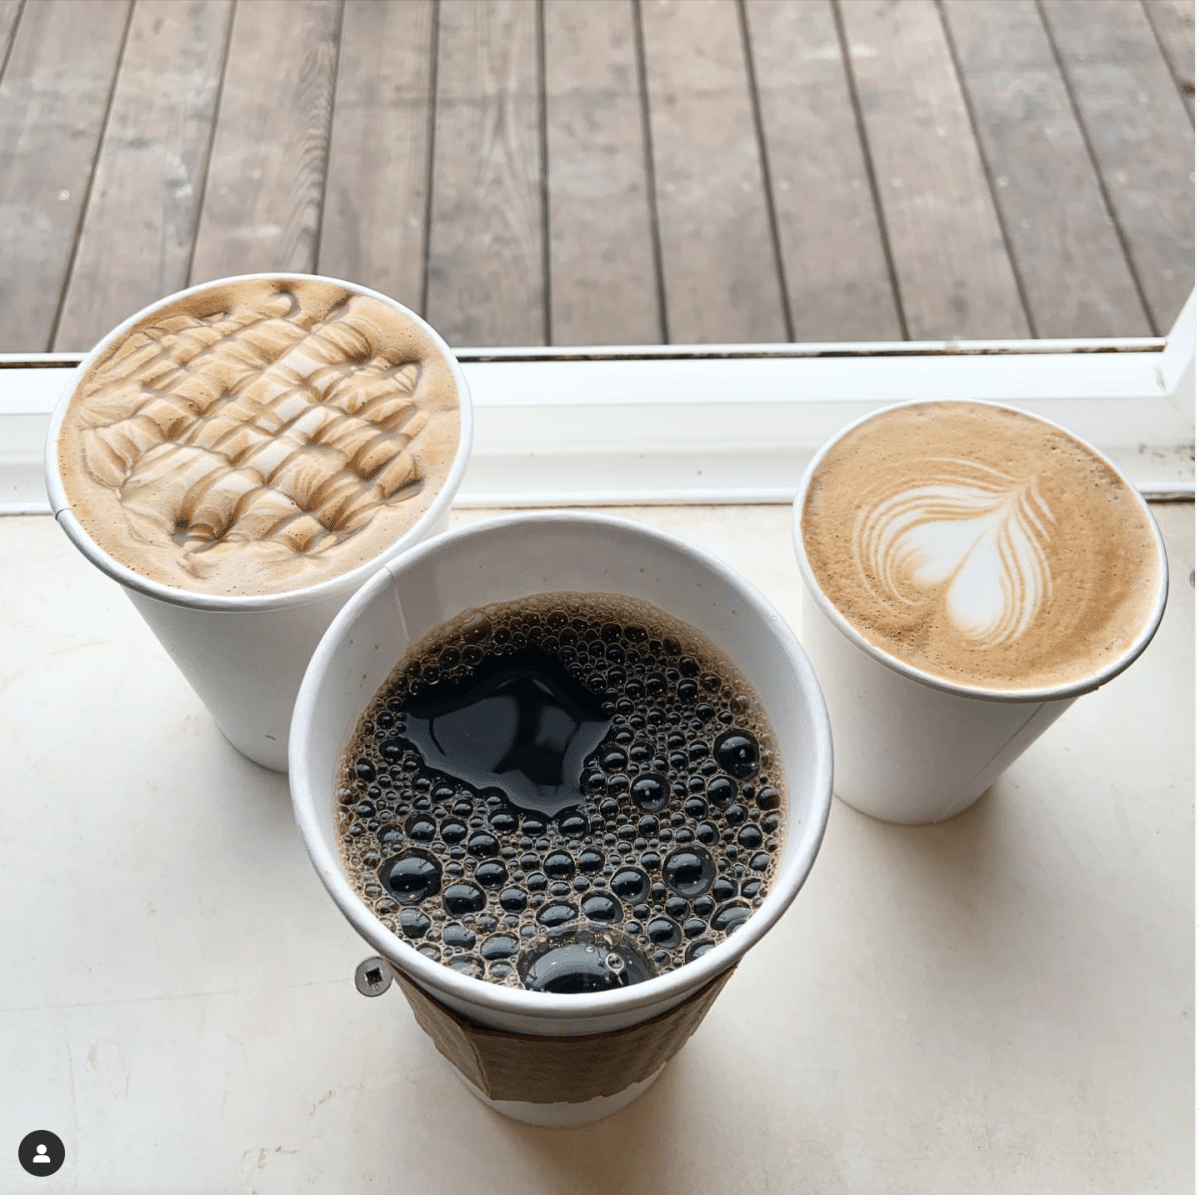 Best restaurants in mendocino, goodlife cafe and bakery coffee